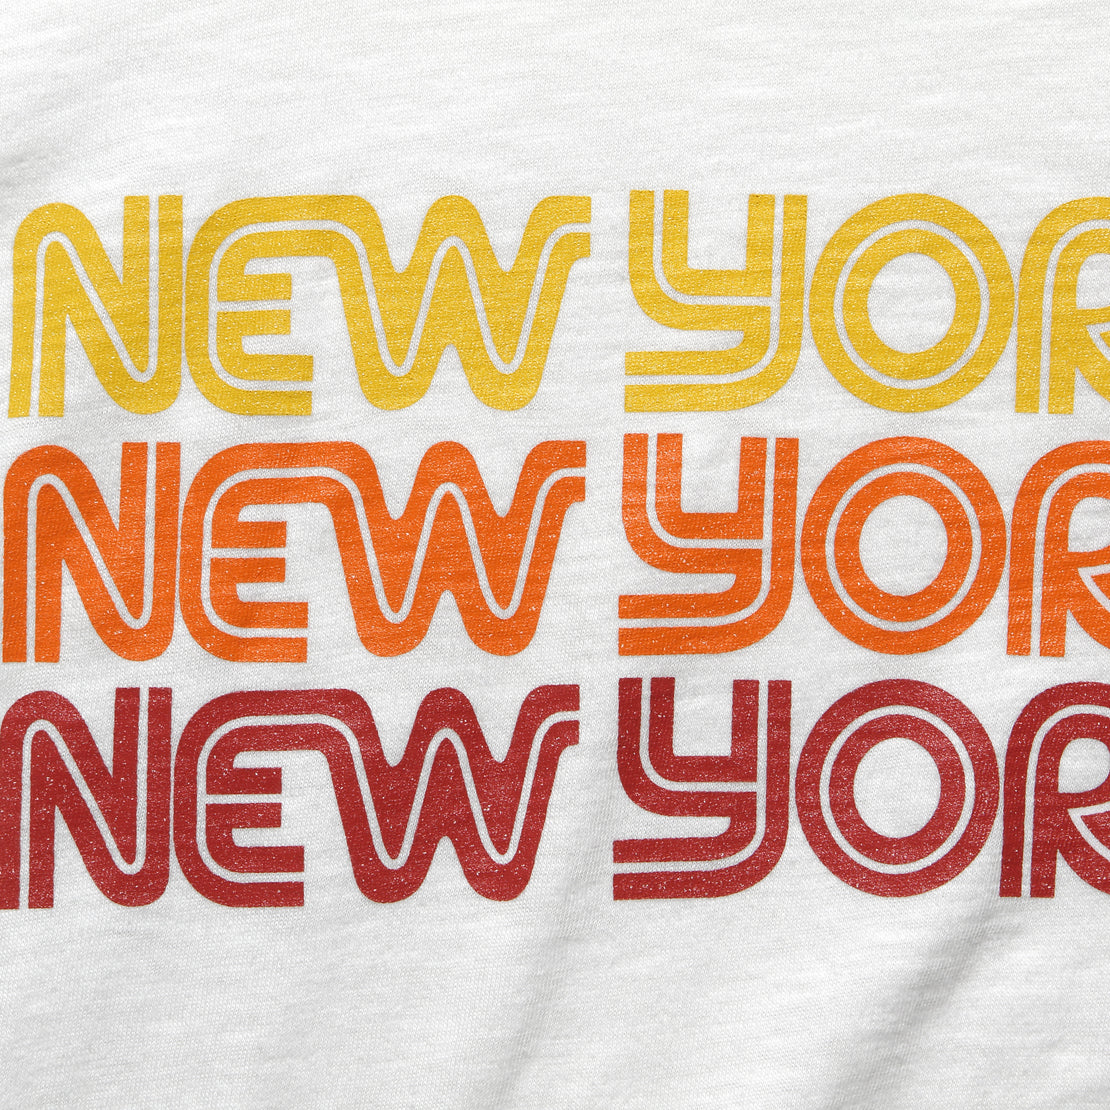 New York Tee - White - Velva Sheen - STAG Provisions - Tops - S/S Tee - Graphic